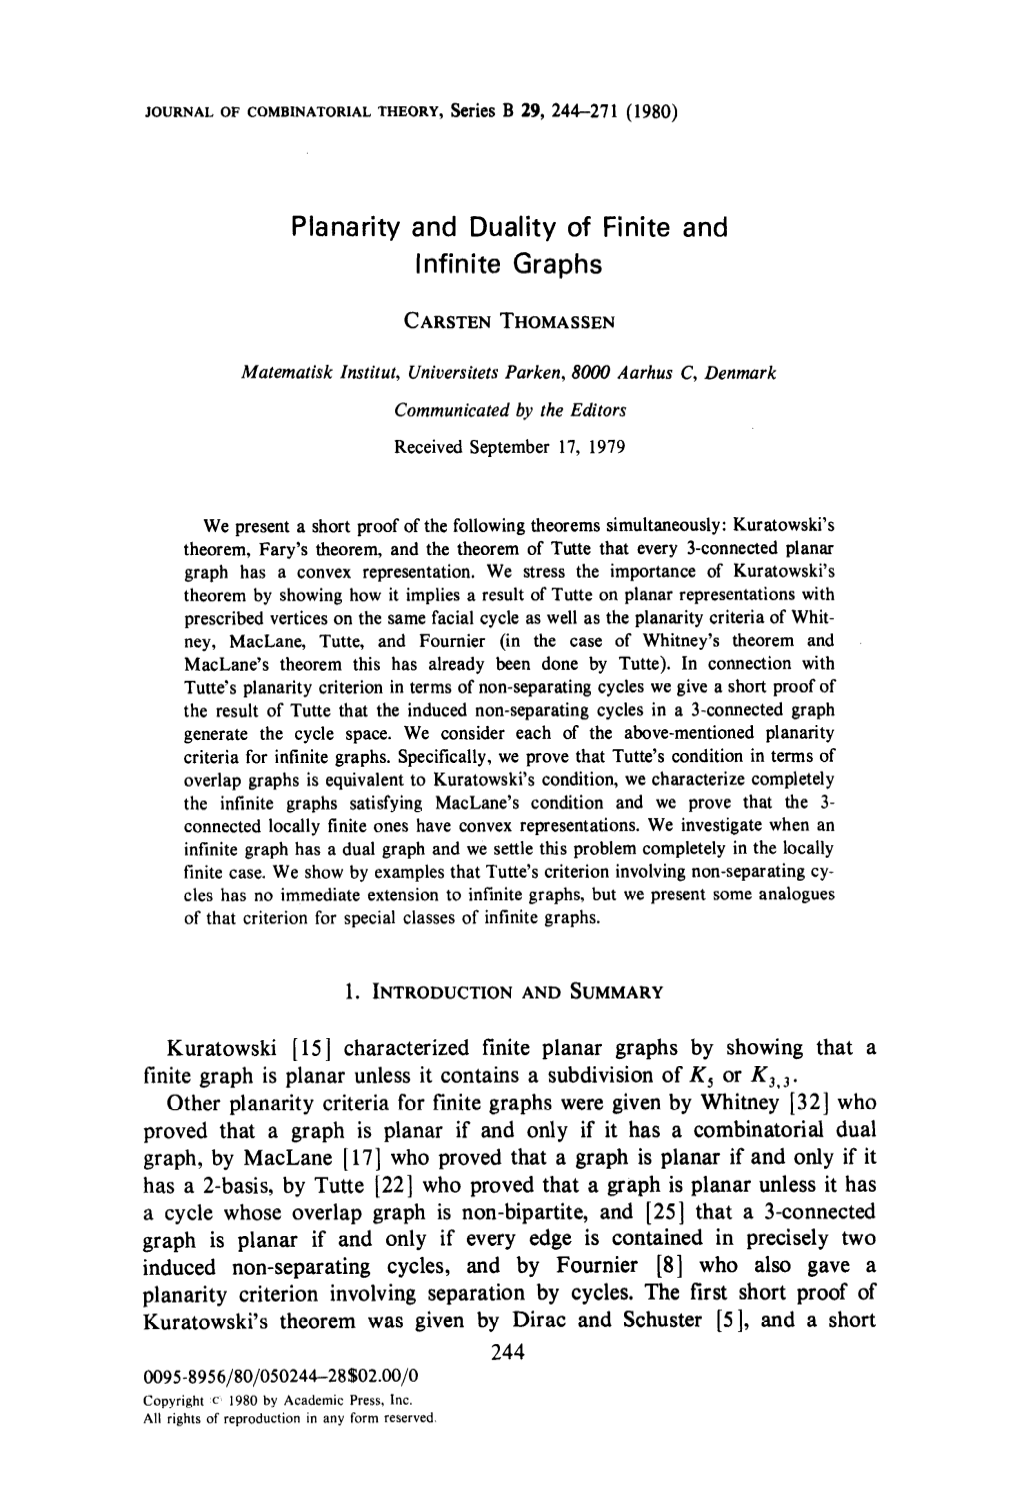 Planarity and Duality of Finite and Infinite Graphs